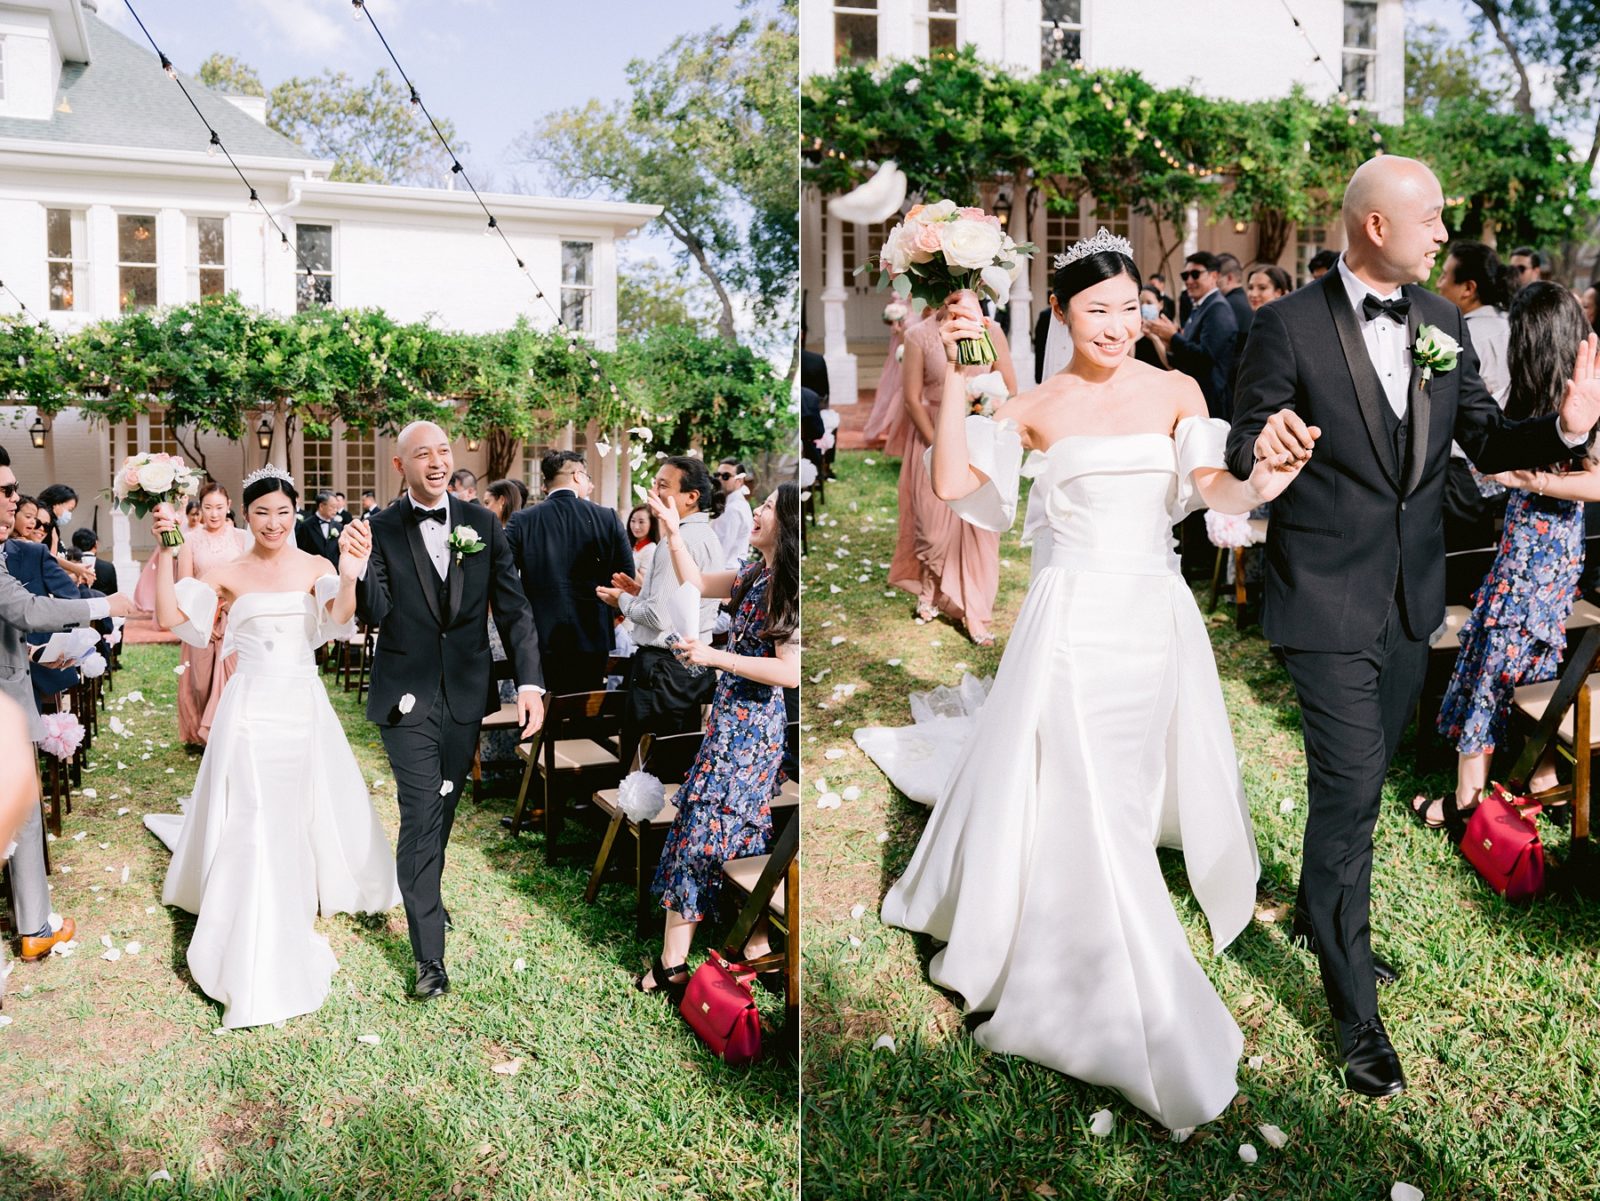 flower petal throw after wedding ceremony, petal toss sendoff, petal toss after weddign ceremony, bride and groom exit, ceremony exit, courtyard wedding at woodbine mansion, woodbine mansion wedding, woodbine mansion wedding details, classic austin wedding, mansion wedding venues near austin, historical wedding venue, best austin wedding venues, austin wedding photographer, hill country wedding, round rock wedding venue